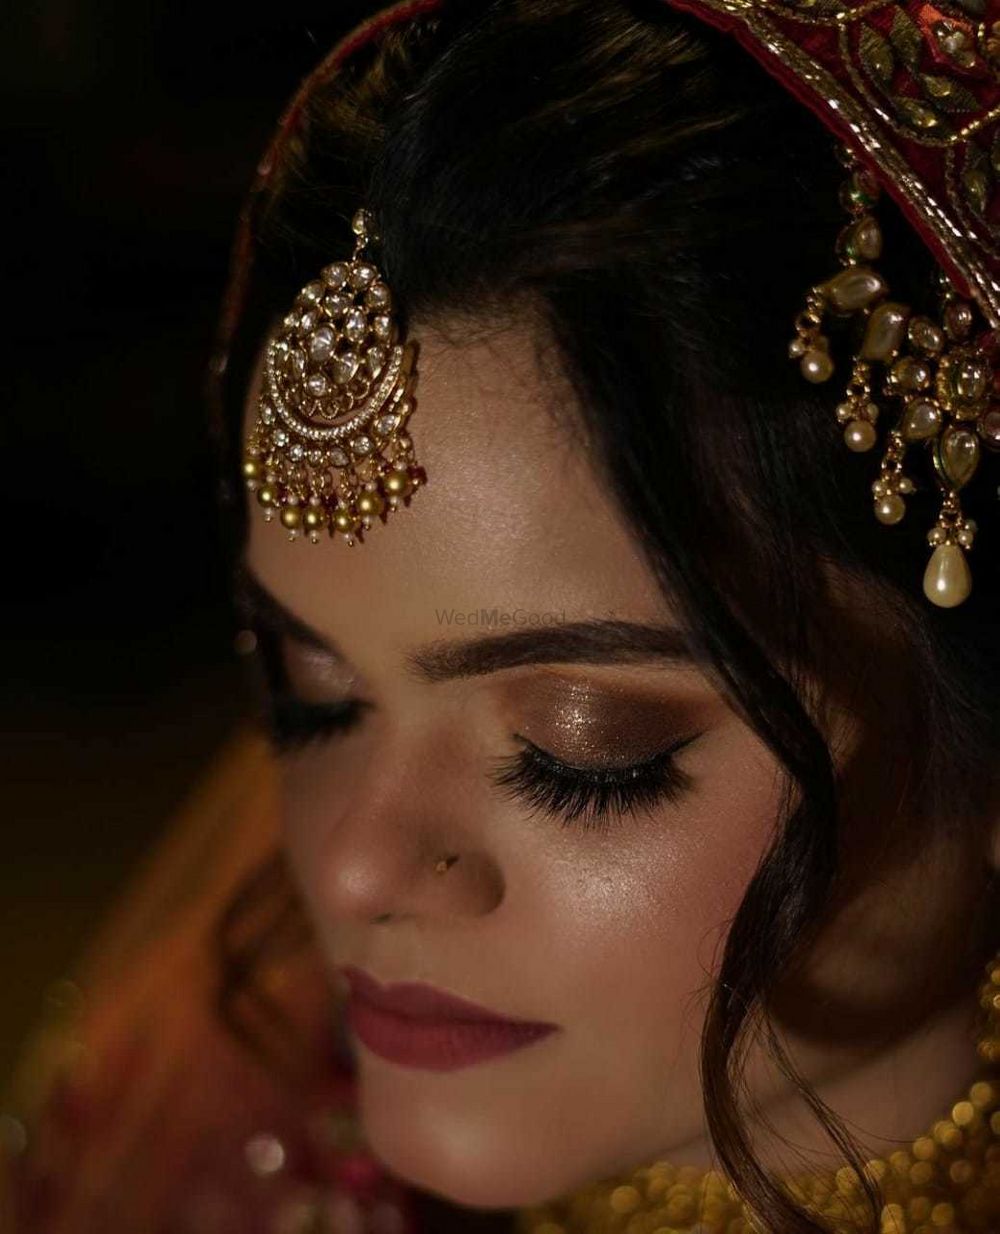 Photo By Brown Beauty Makeovers - Bridal Makeup